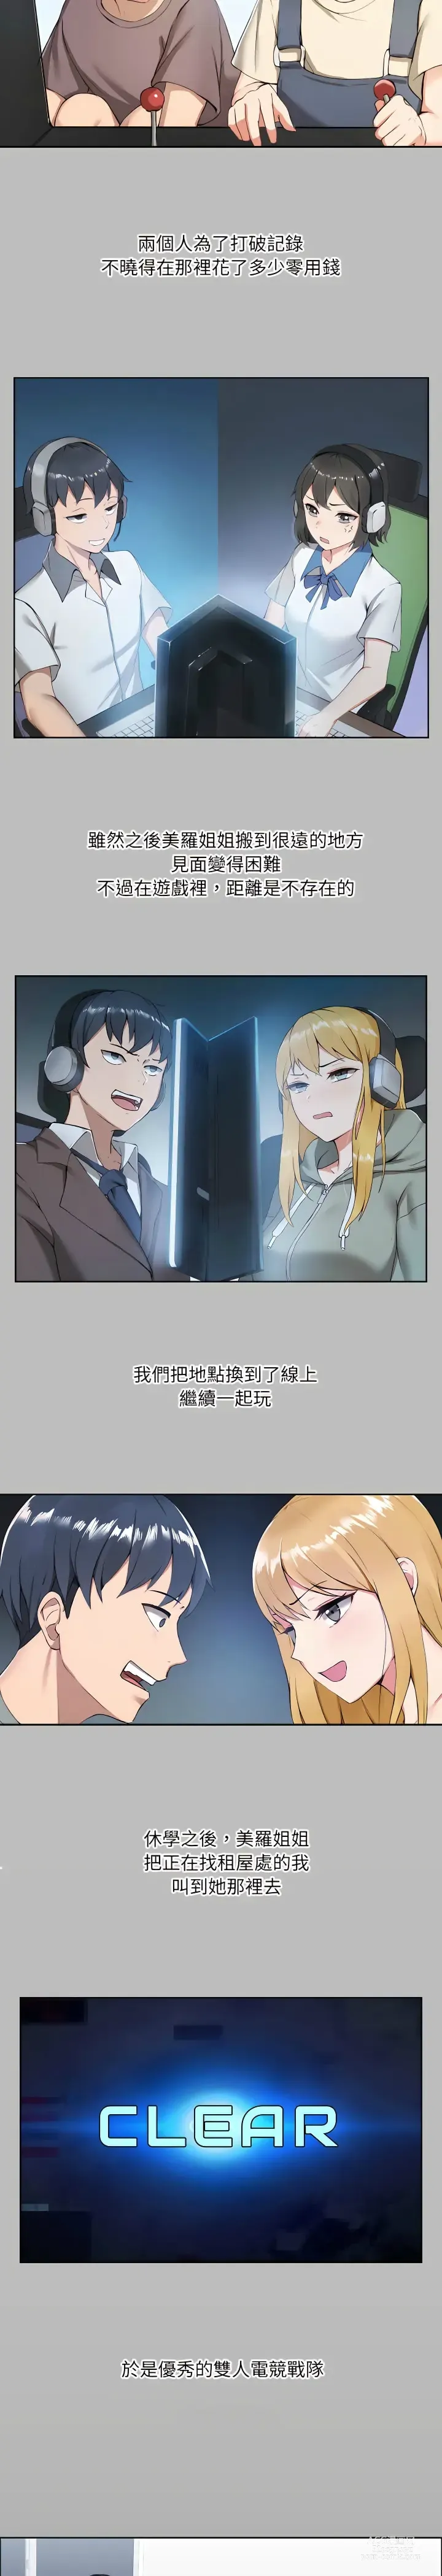 Page 6 of manga 爱打游戏的姐姐／All About That Game Life